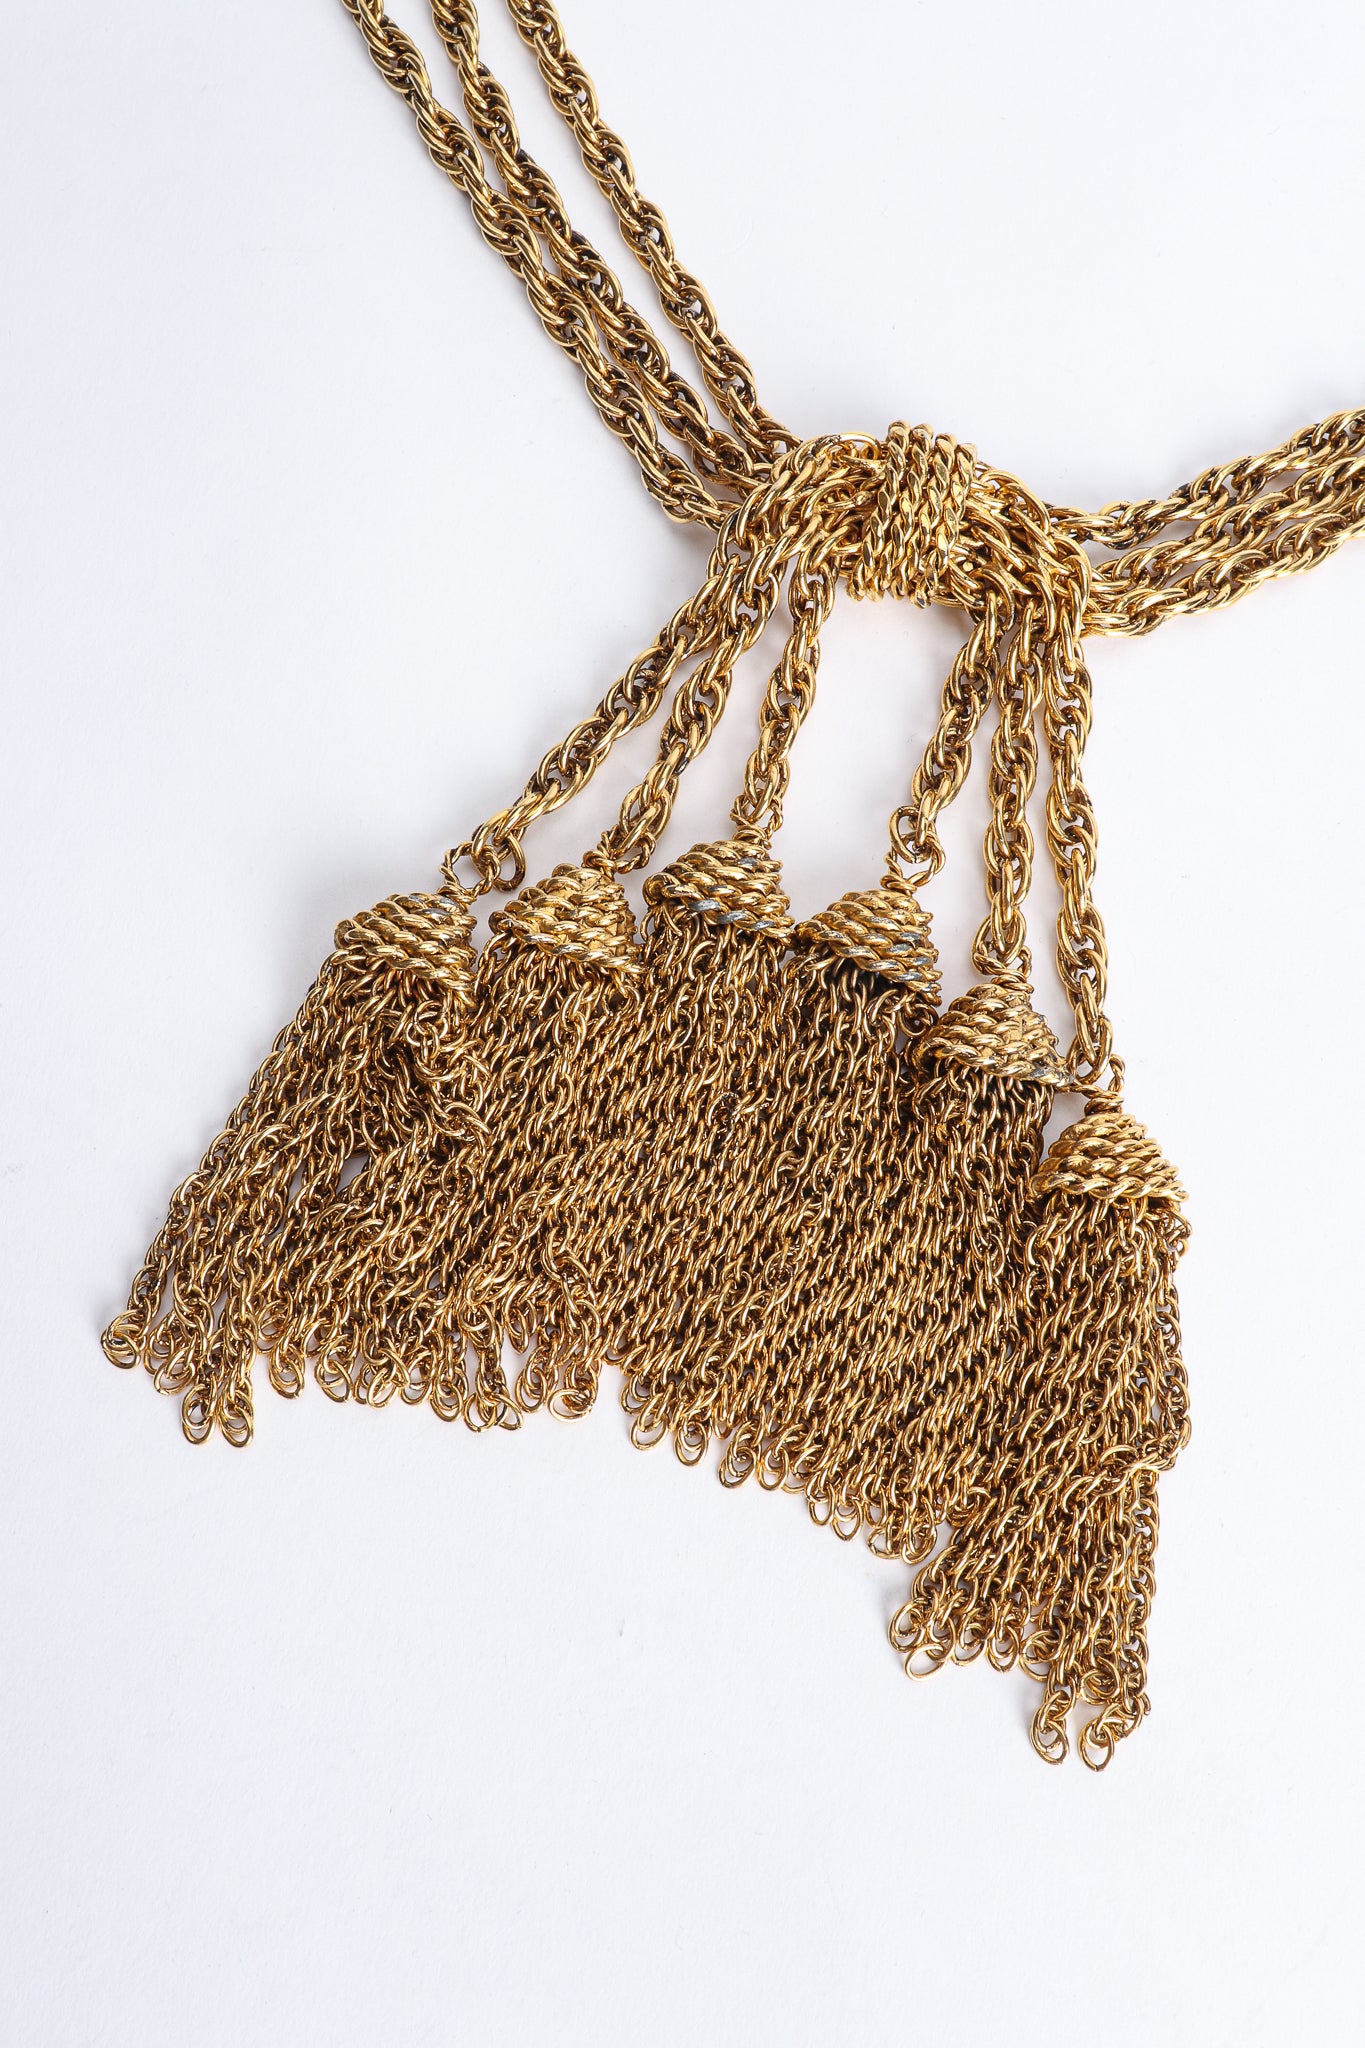 Vintage Moschino Gold Tassel Chain Belt Necklace detail at Recess Los Angeles